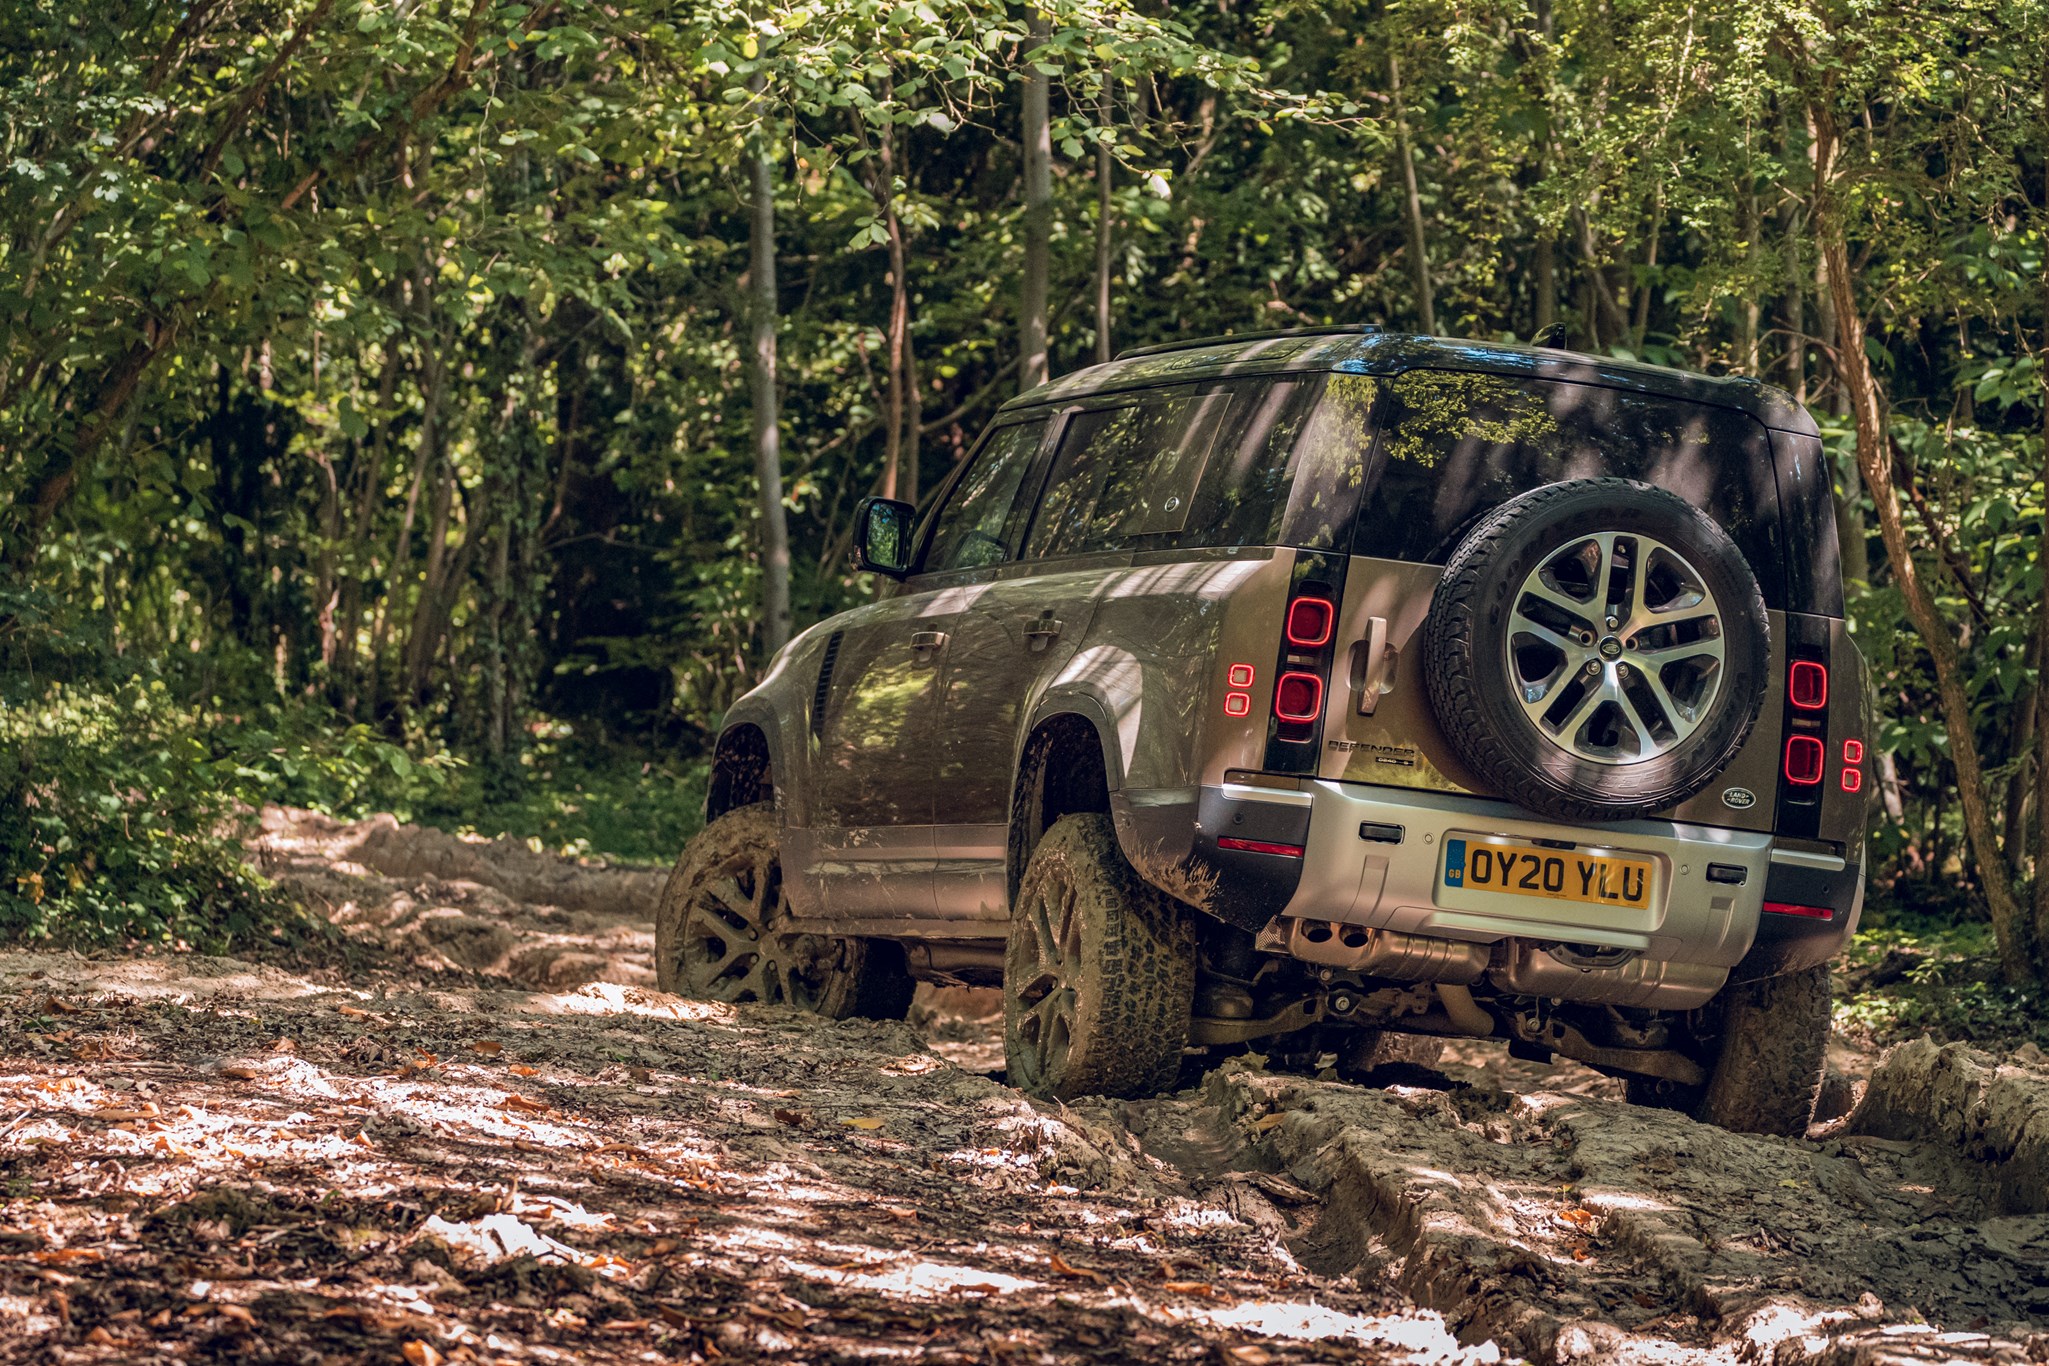 Land Rover Defender (2020) off-road view from rear, driving